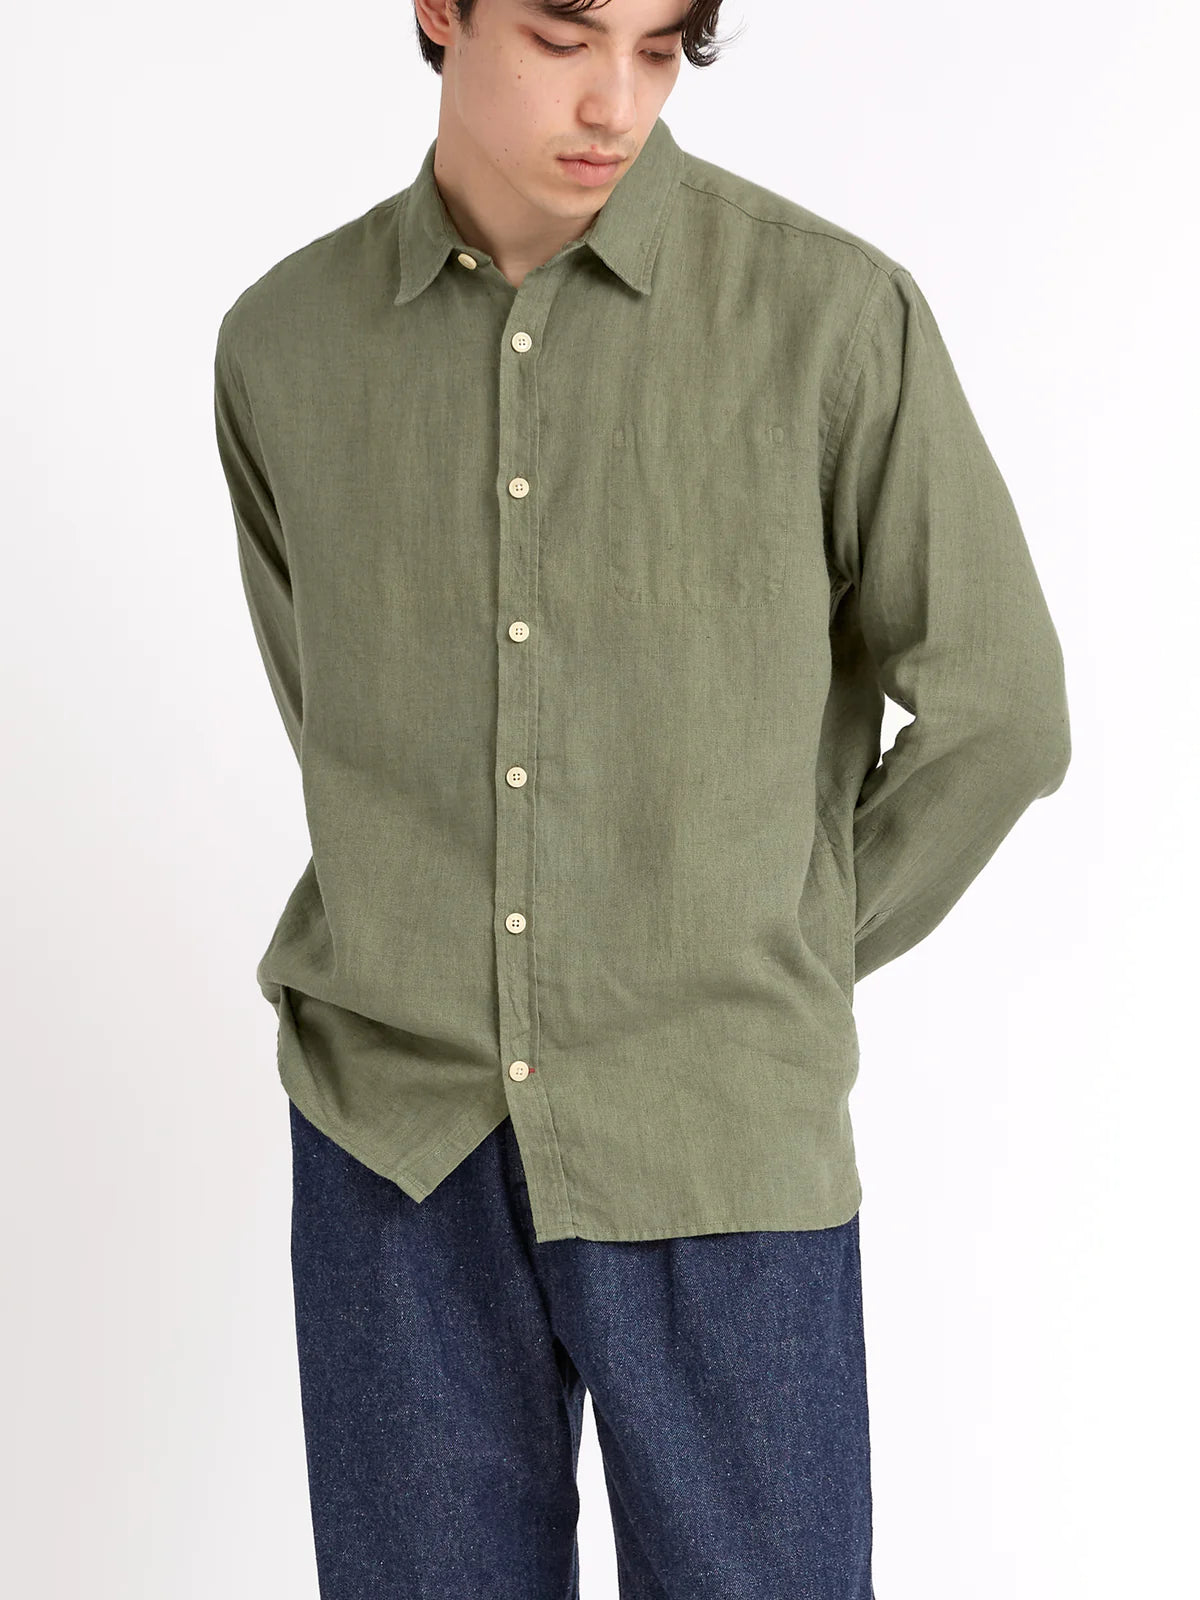 New York Special Shirt - Coney Green